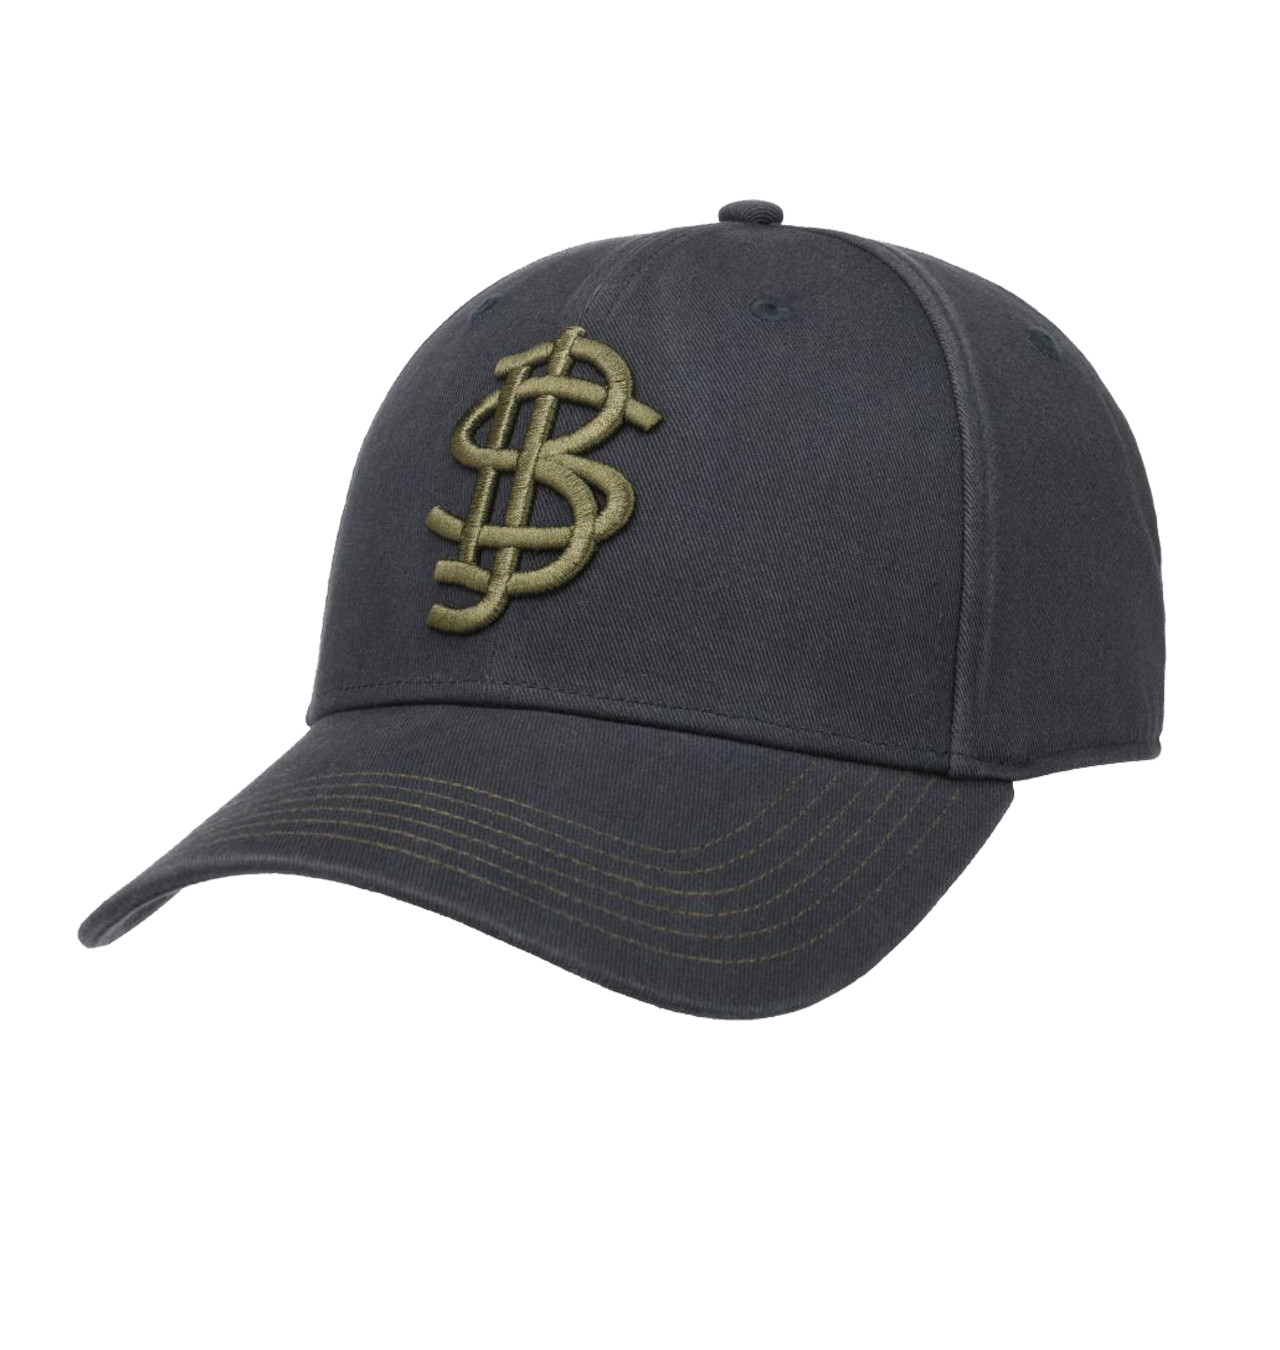 Stetson - Stitched Logo Cap With UV Protection - Navy